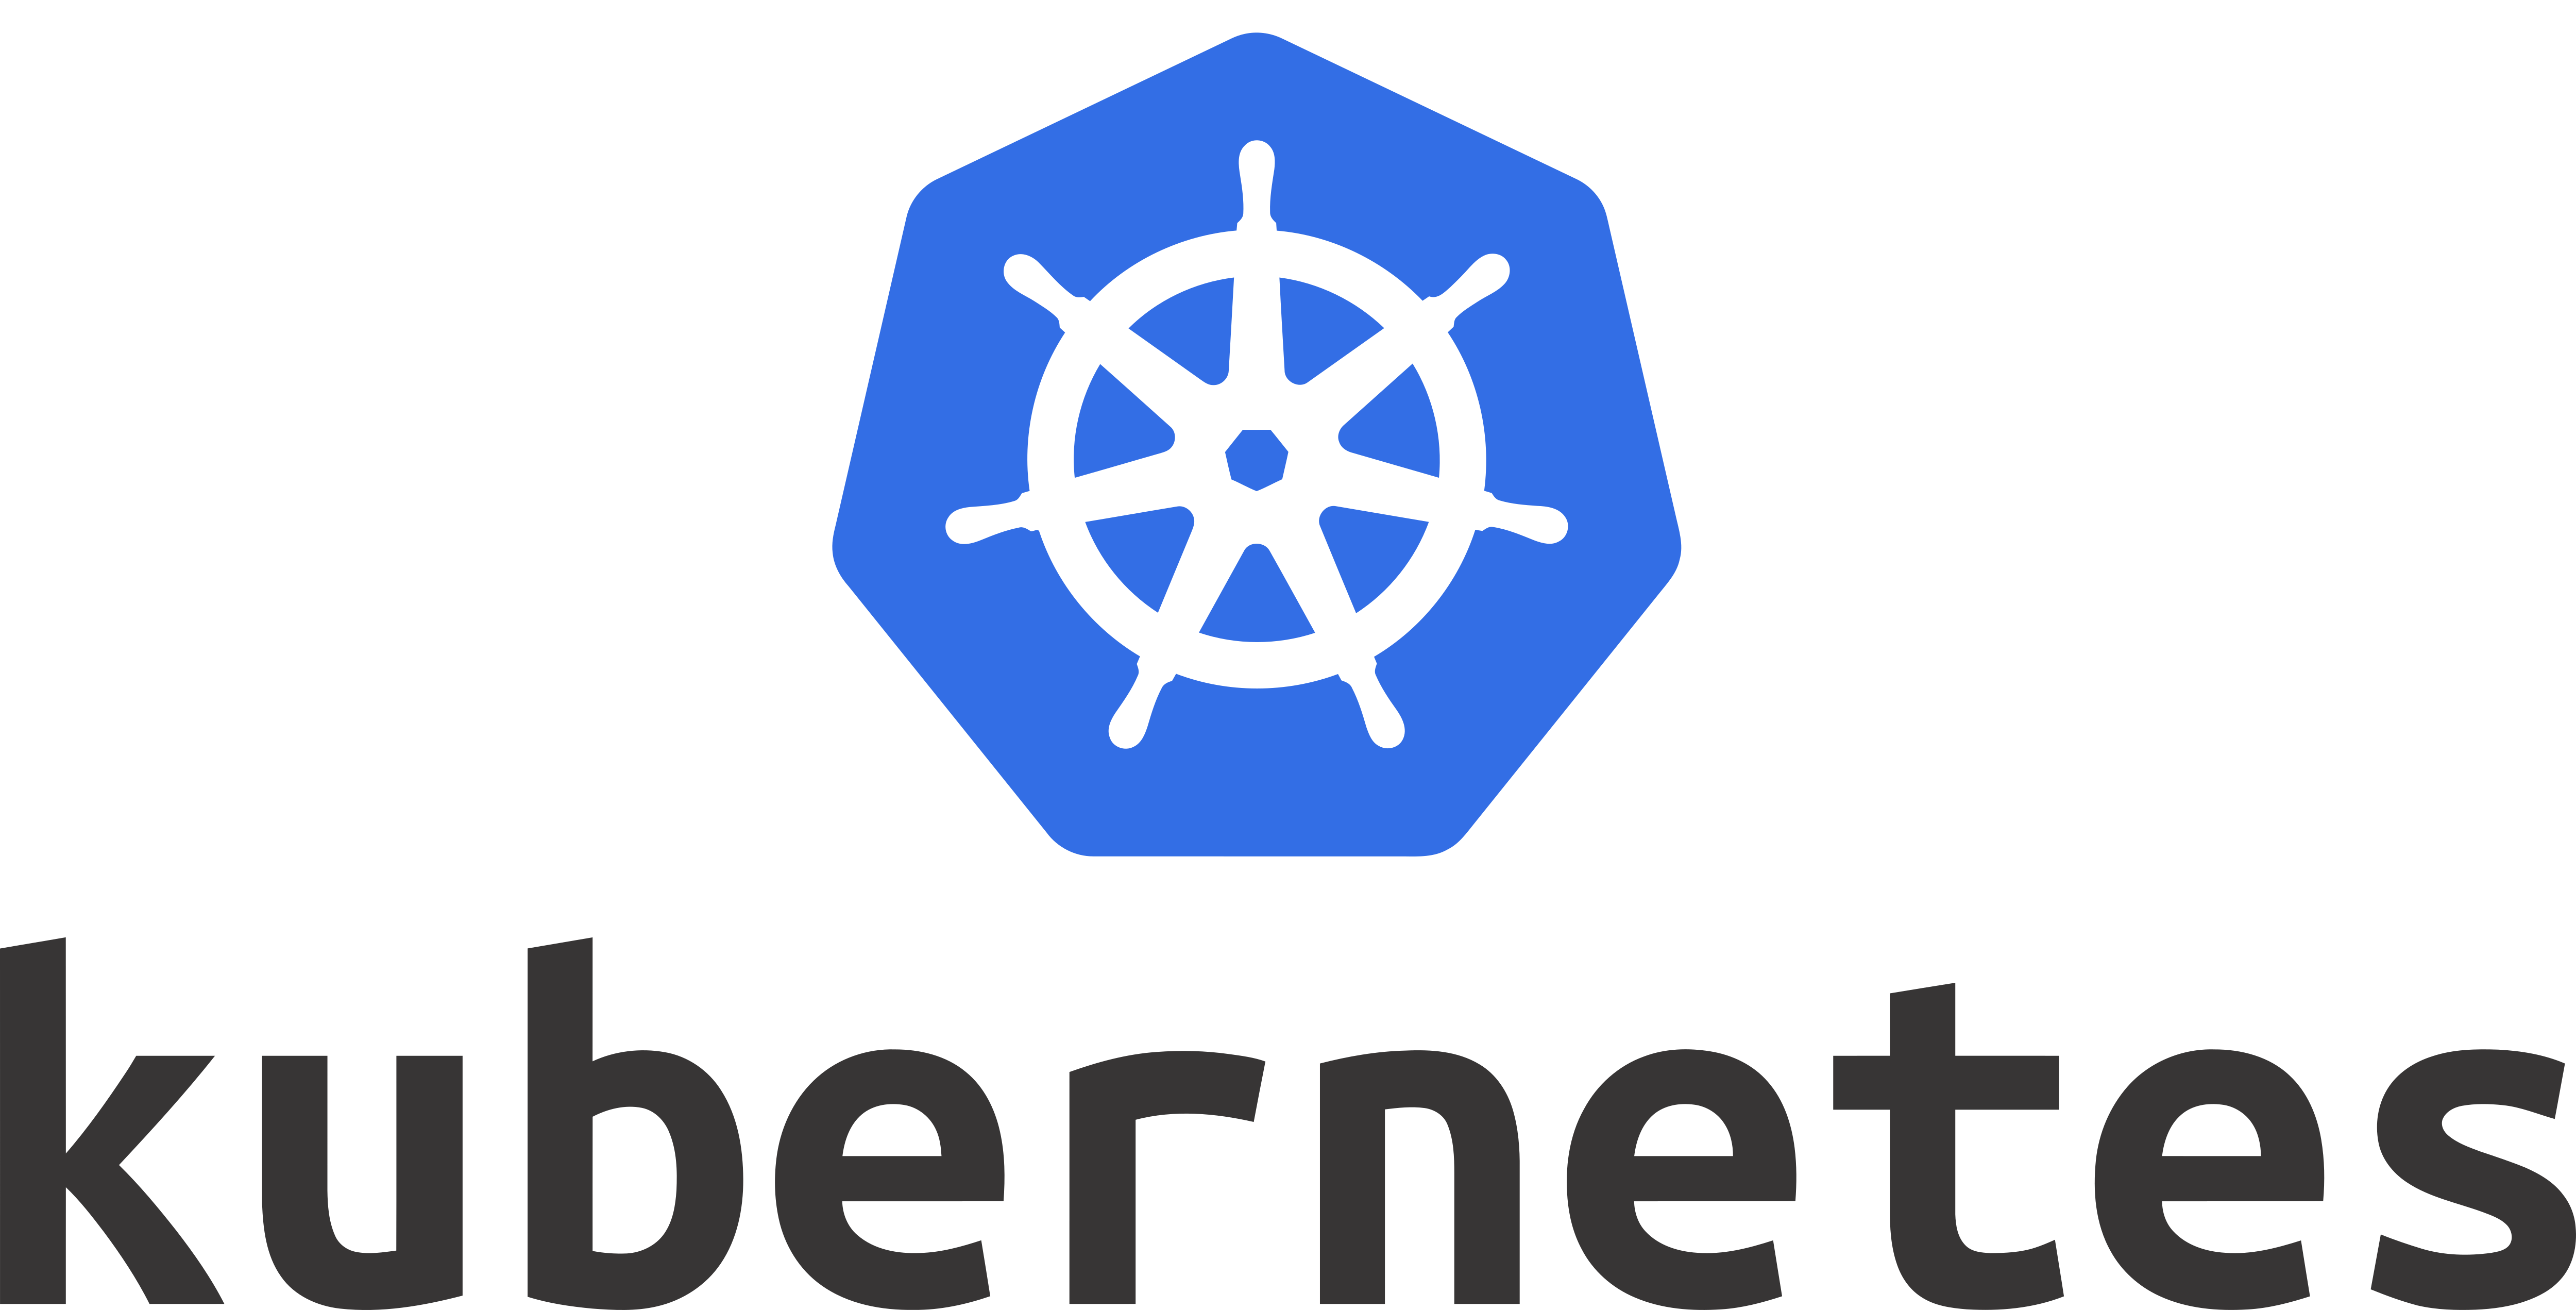 We are launching a dedicated Kubernetes consulting service